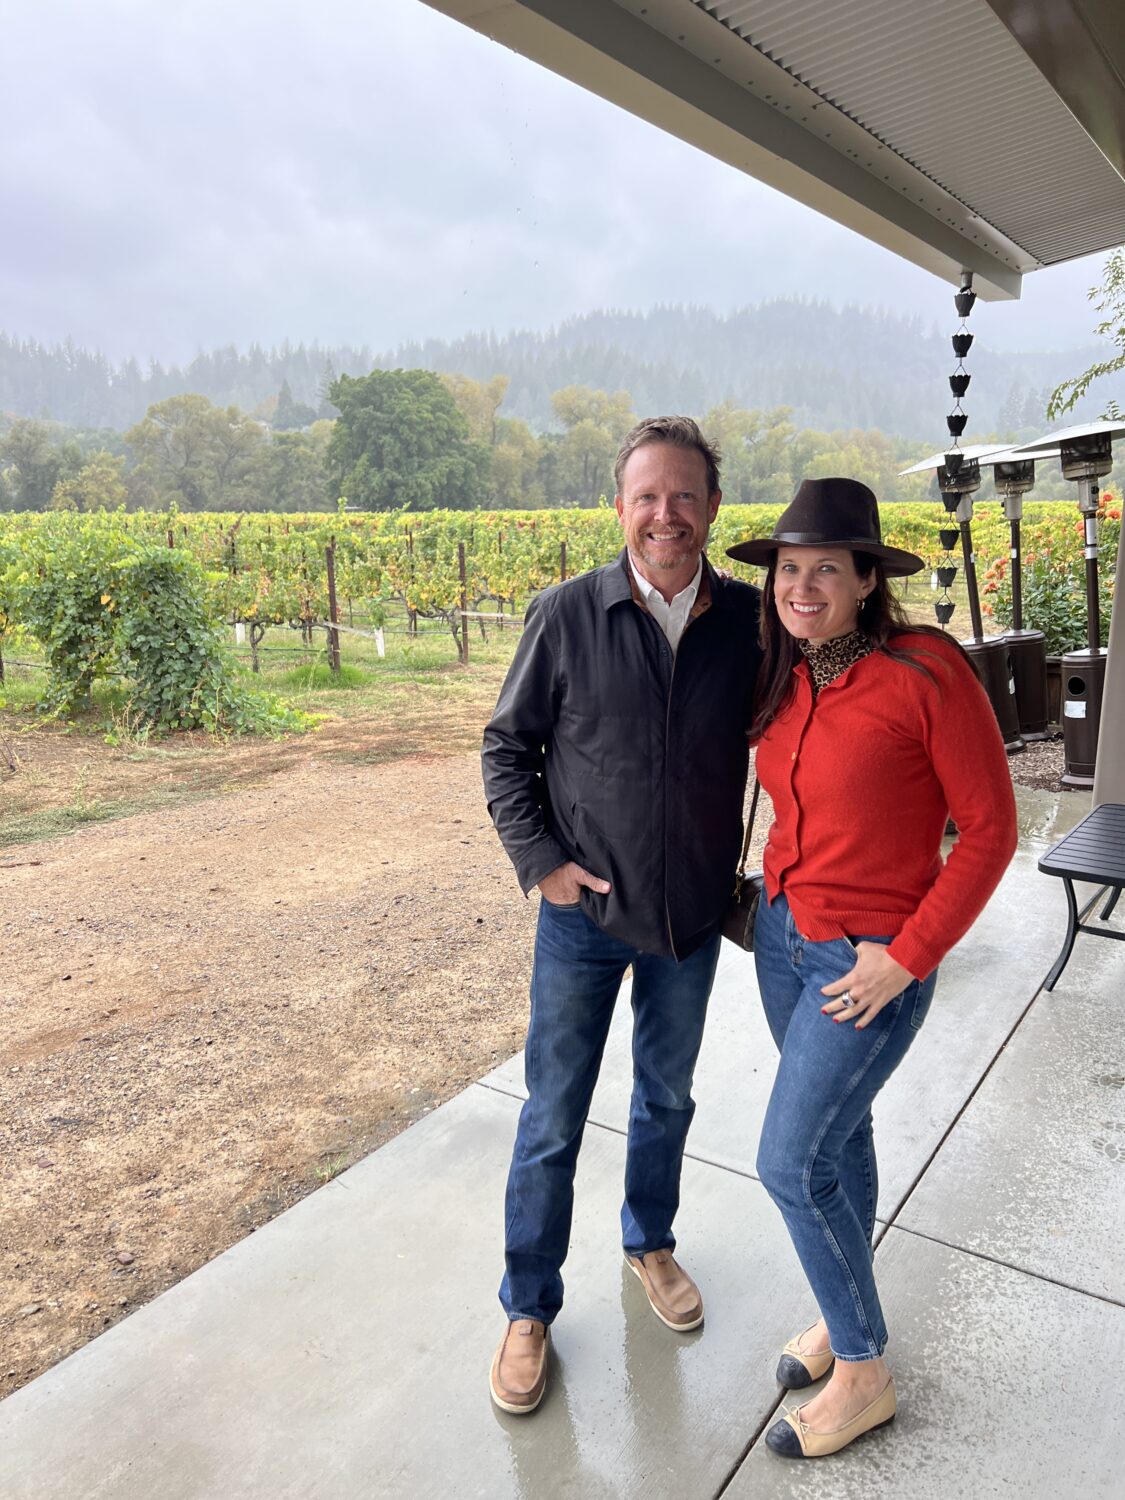 All Smiles at Amista Vineyards with Brian Shapiro